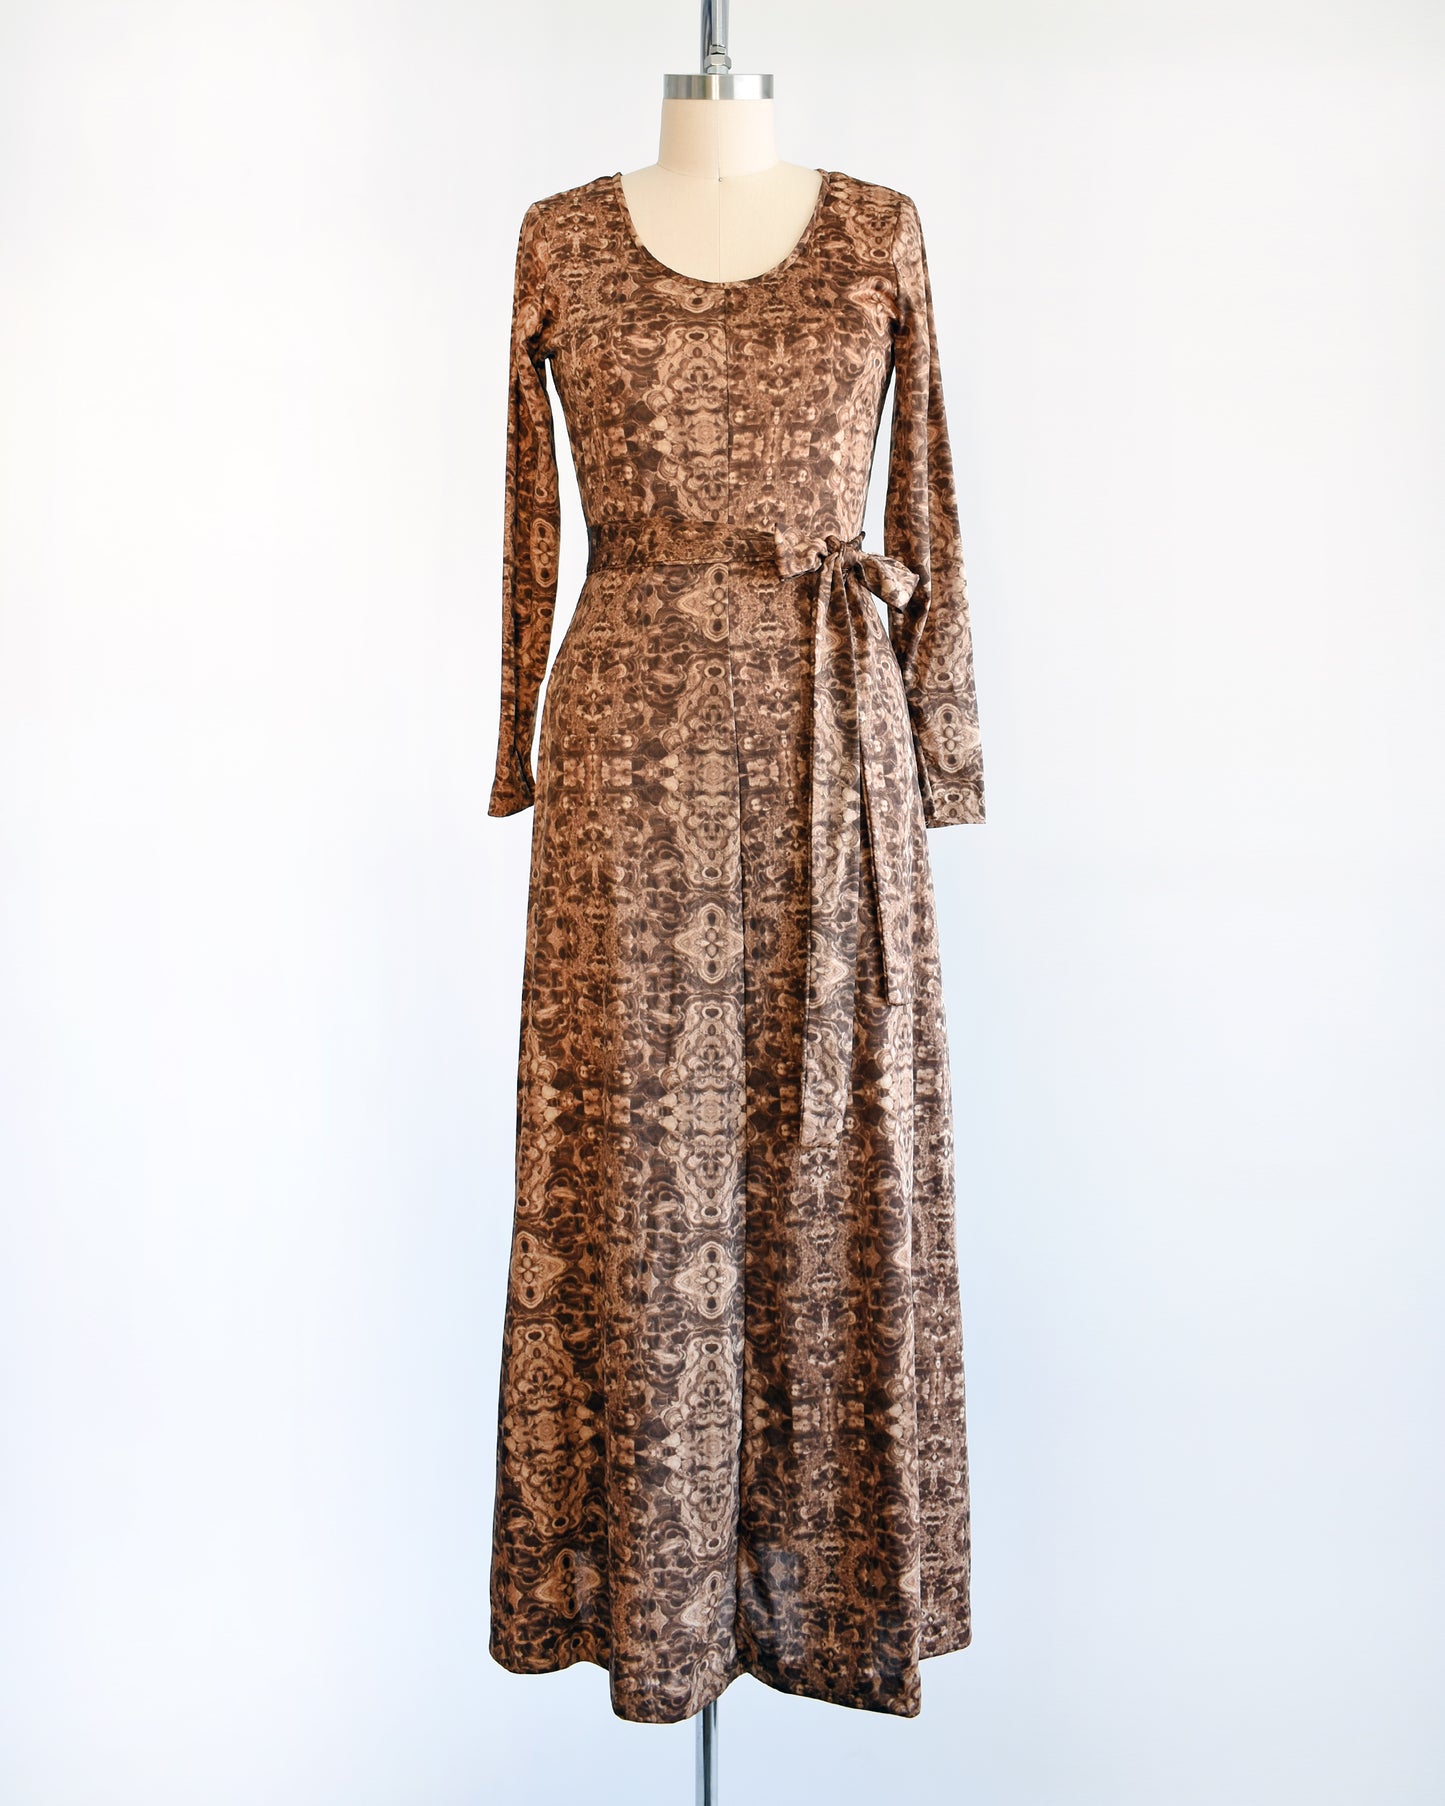 A vintage 1970s long sleeve maxi dress which features a psychedelic kaleidoscope pattern in light and dark brown.